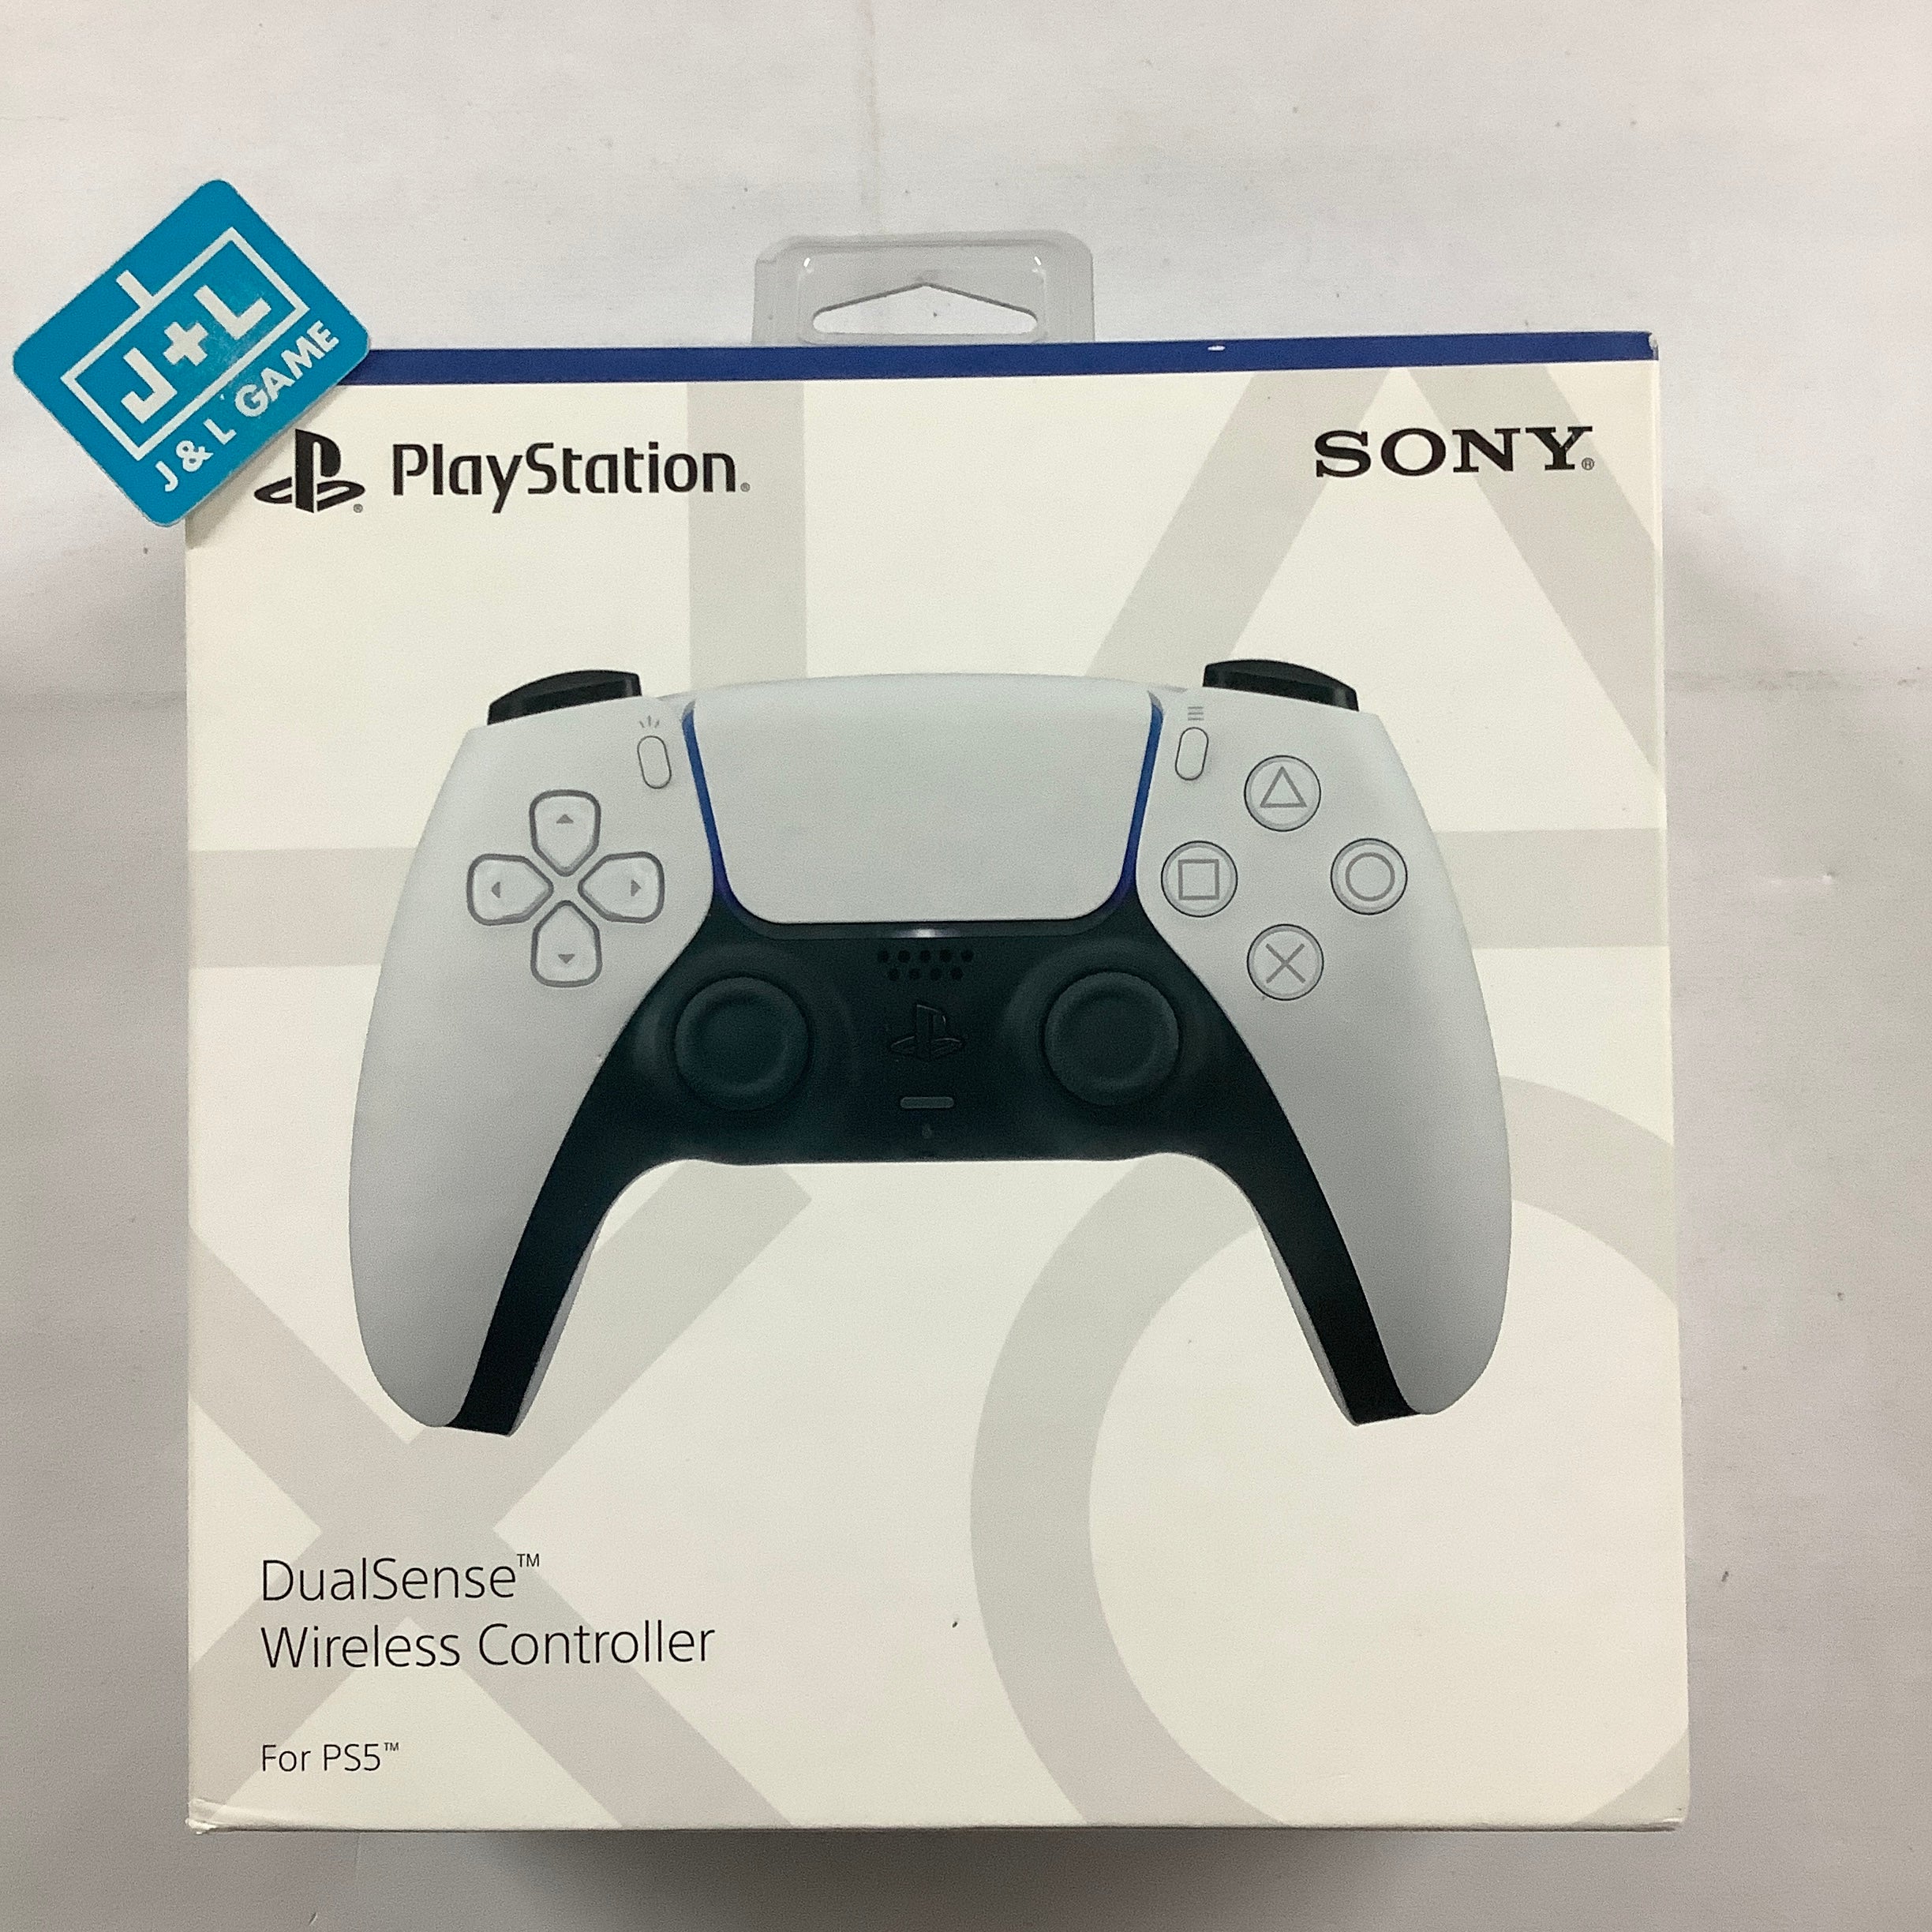 SONY PlayStation 5 DualSense Wireless Controller (White) - (PS5 